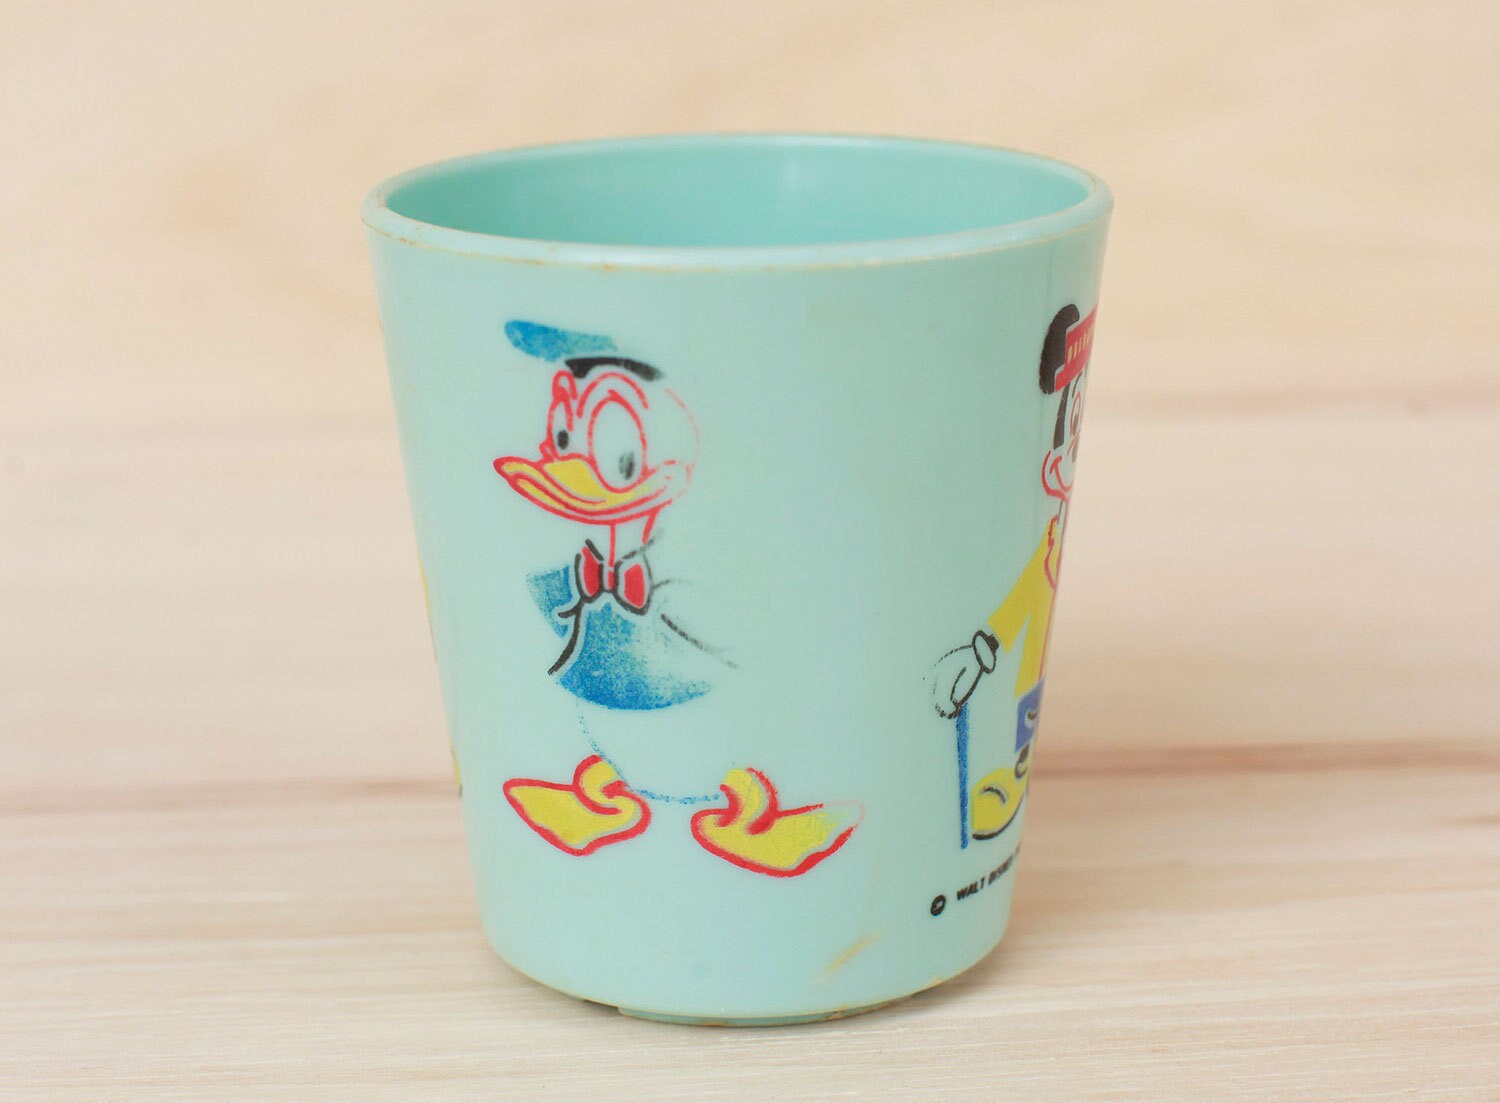 Vintage Child's Blue Celluloid Disney Mug Micky Mouse and Donald Duck 30s  by W